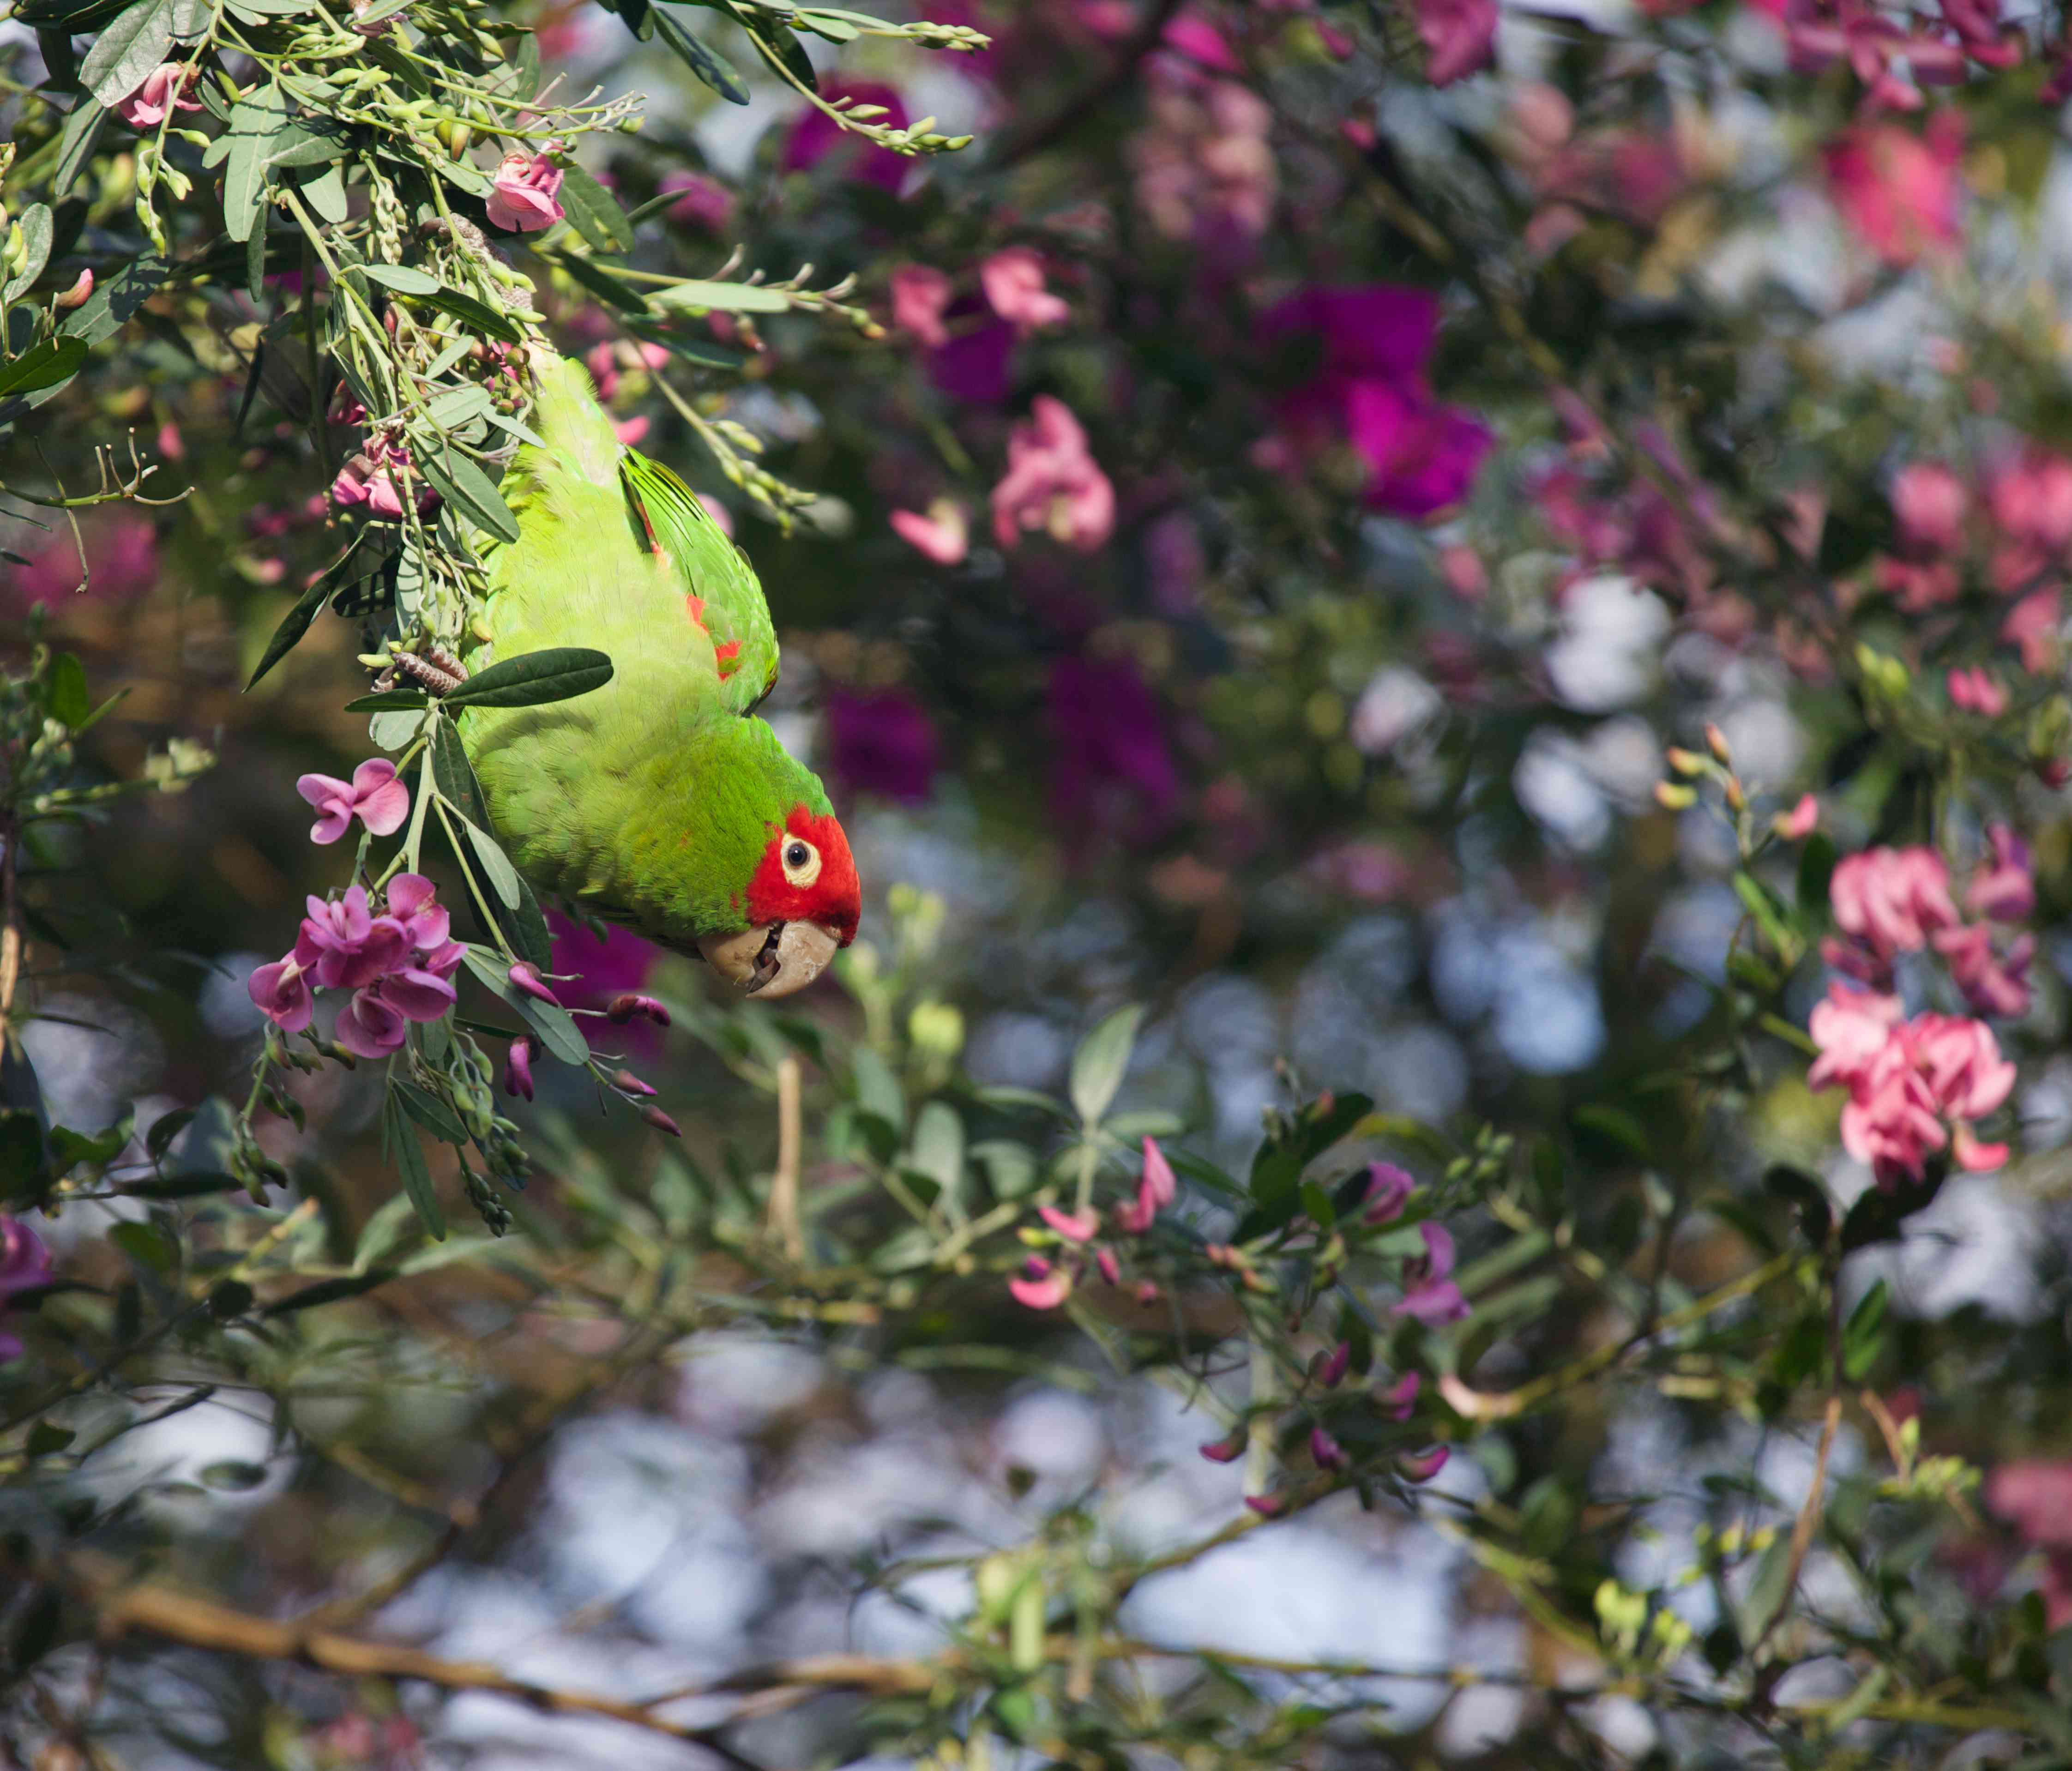 cherry-headed conure in a tree